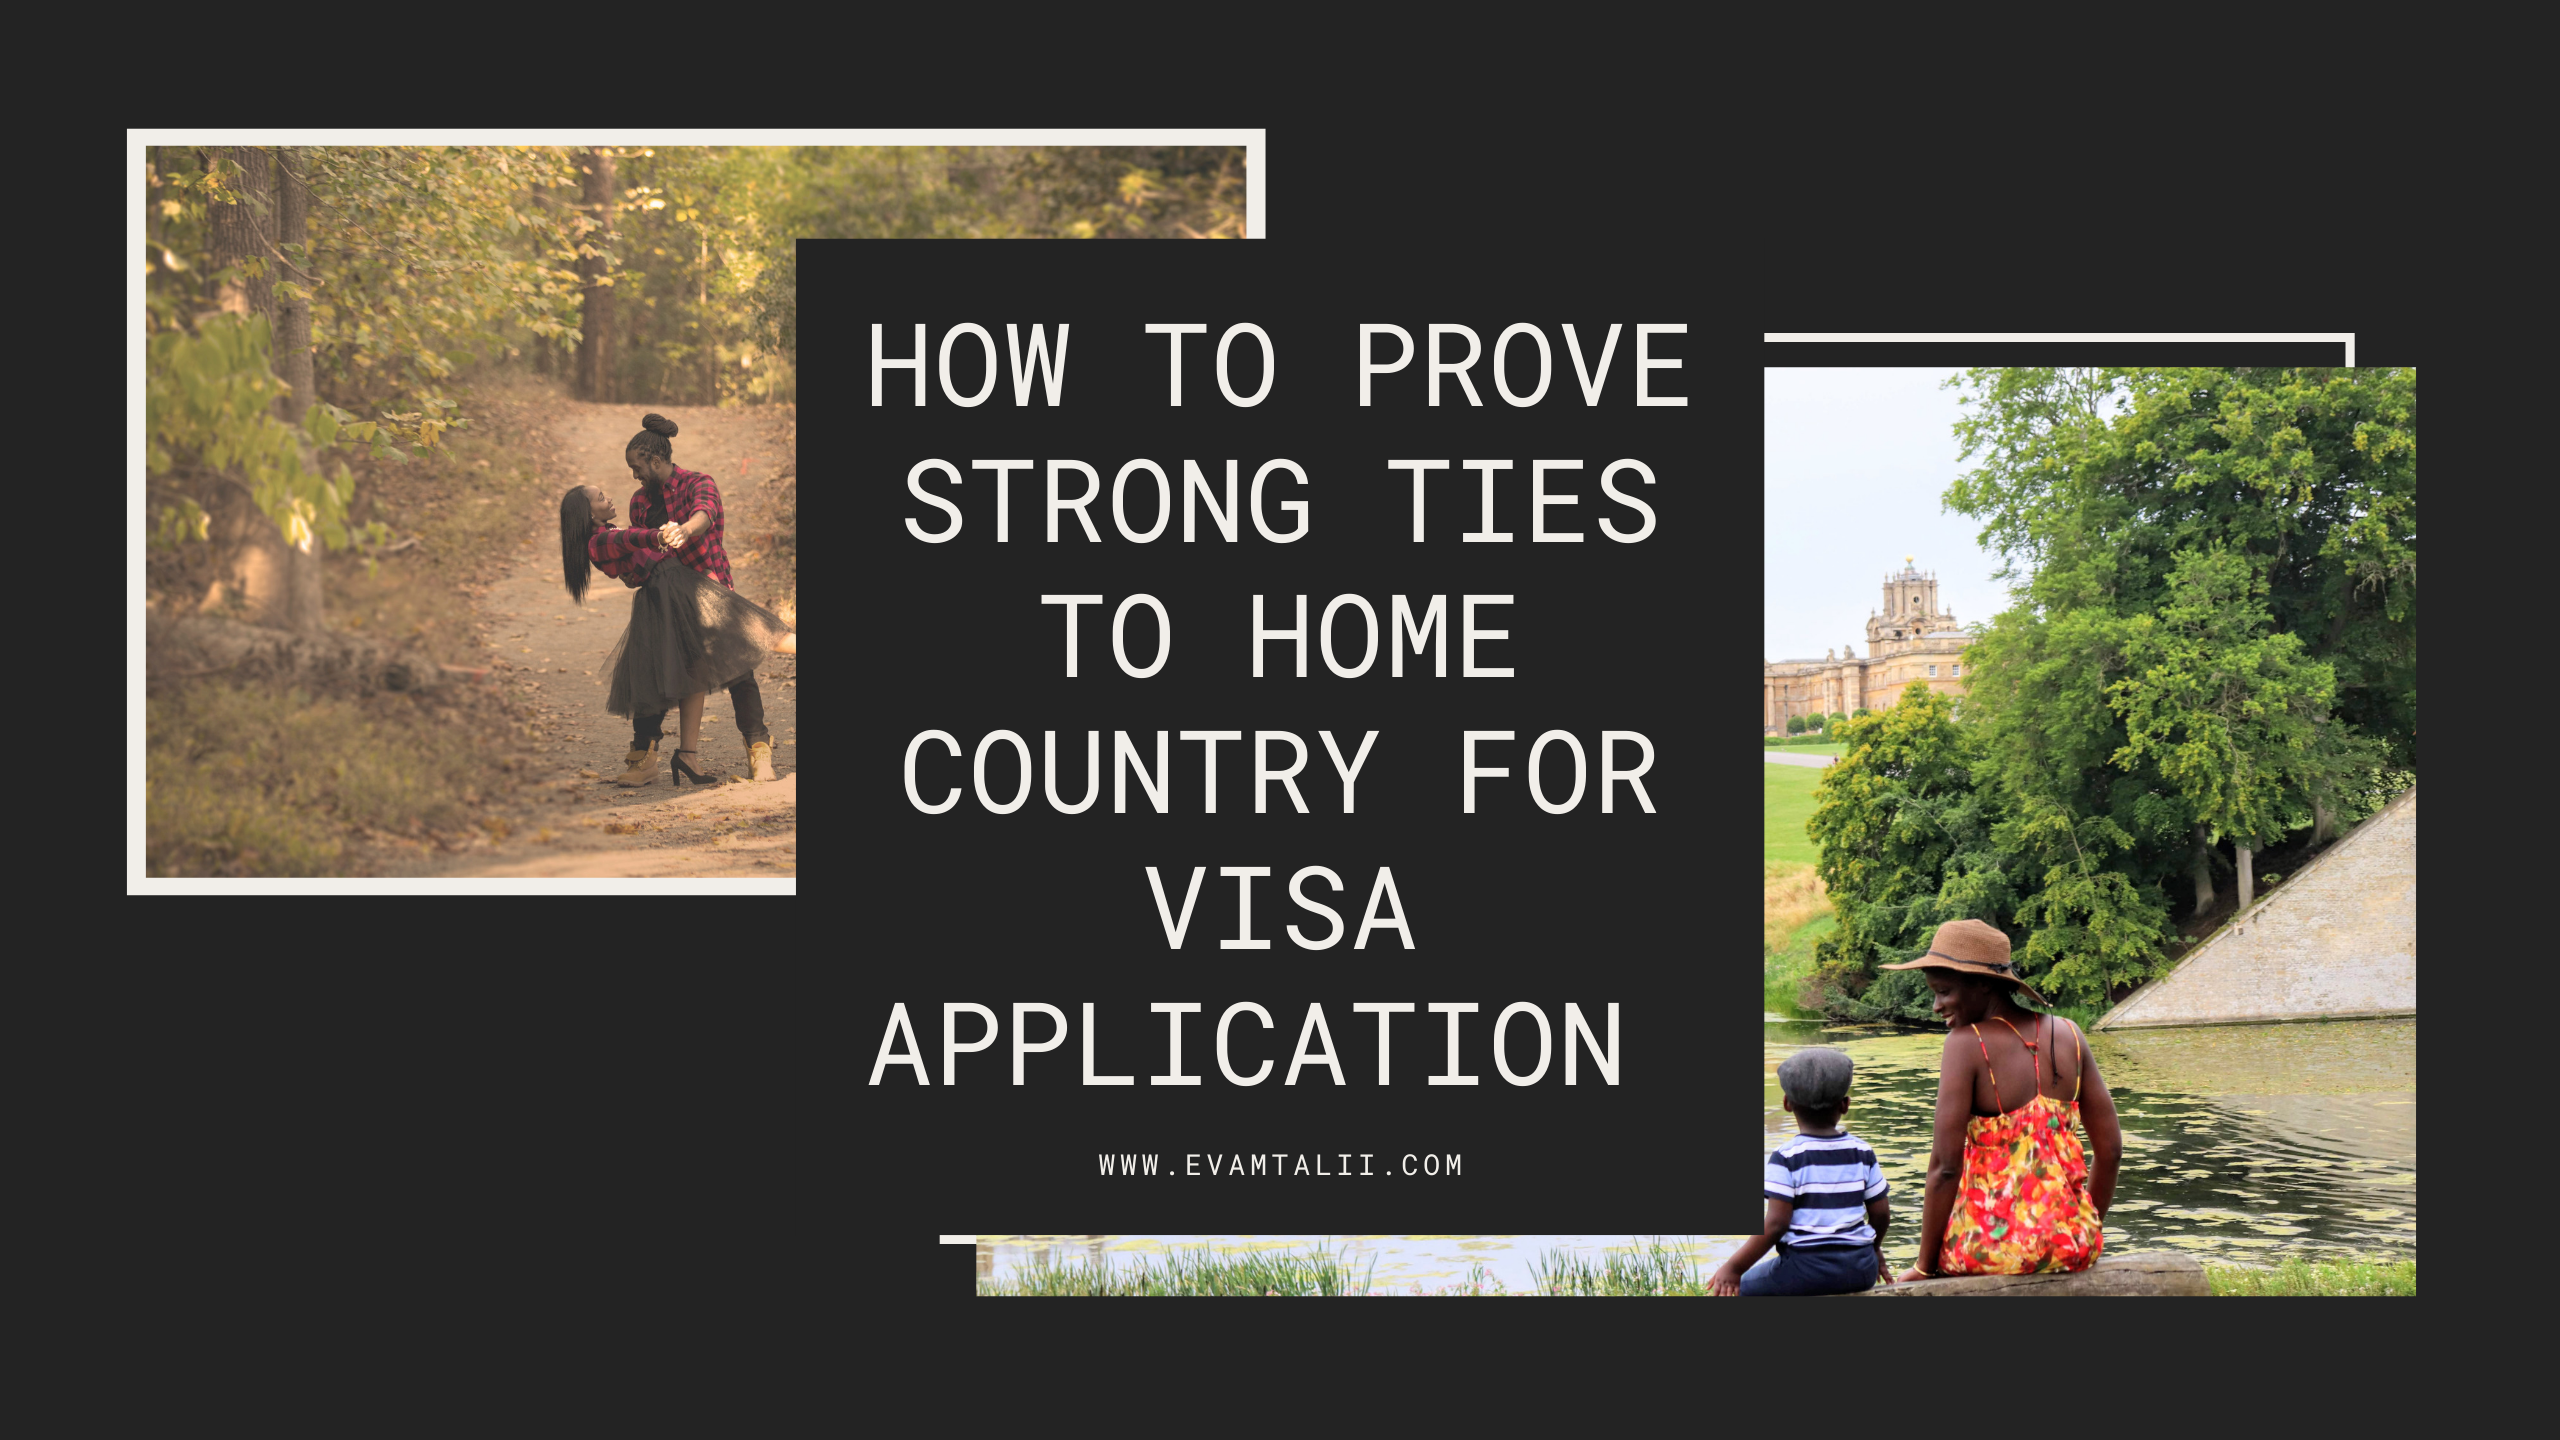 How to Prove Strong Ties to Home Country for Visa Application